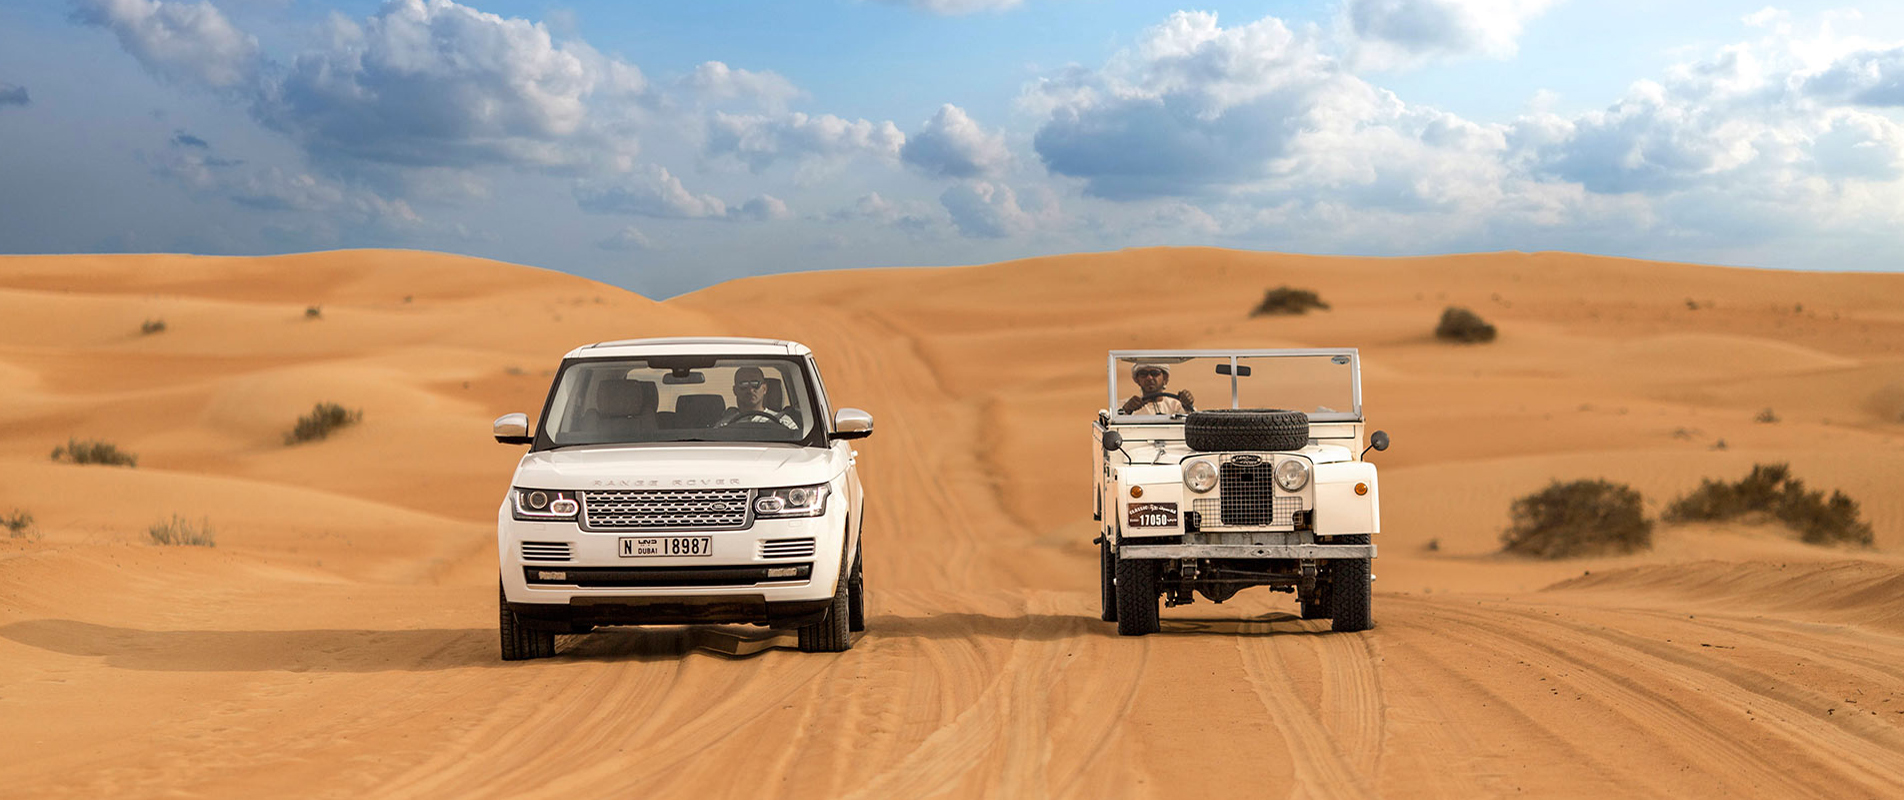 Land Rover Joins Platinum Heritage as ‘Official Adventure Partner’ in the UAE